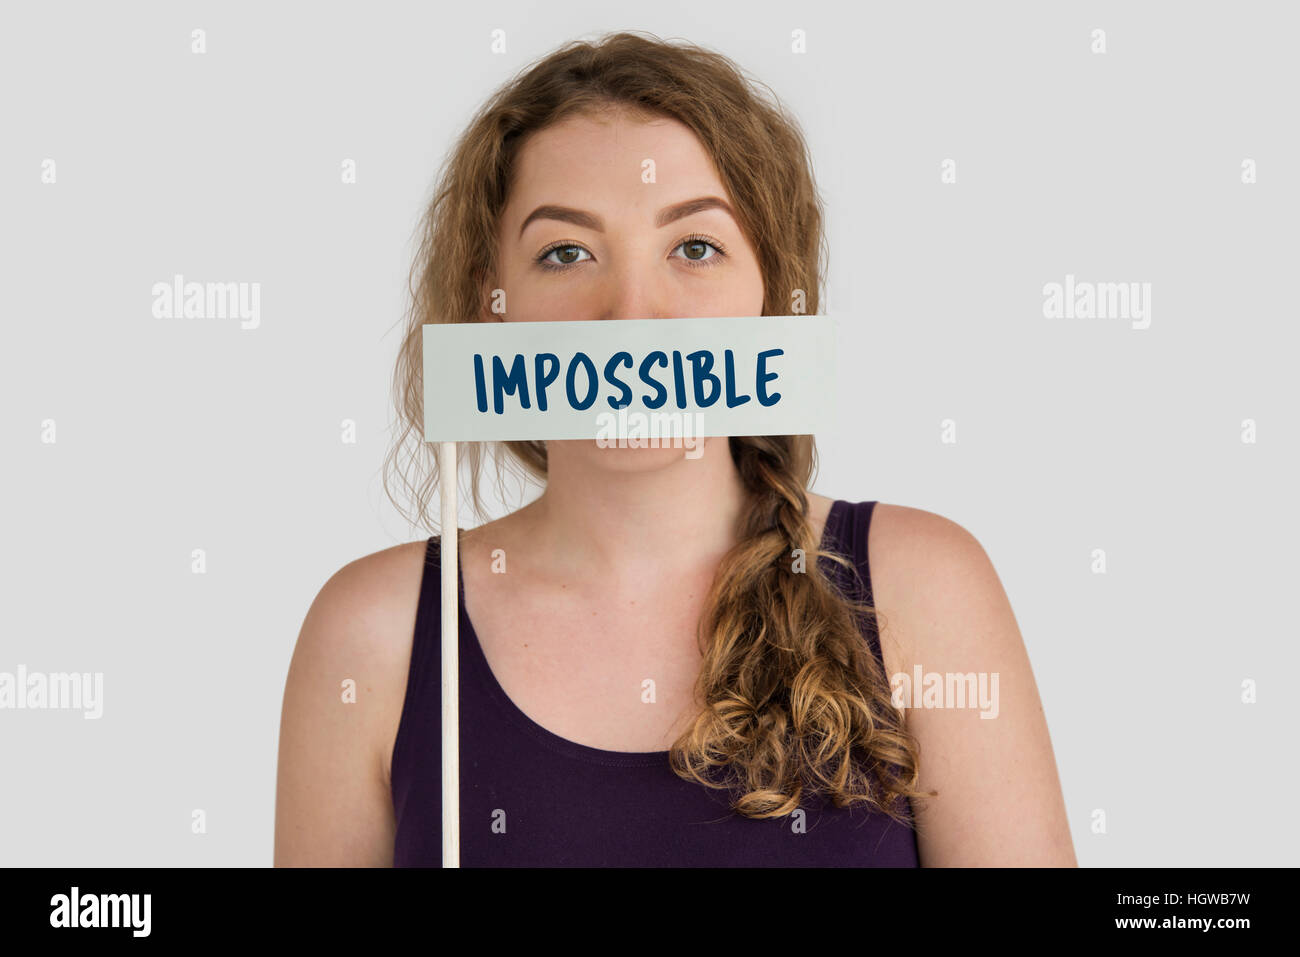 Impossible Unbelieved Pessimism Word Concept Stock Photo